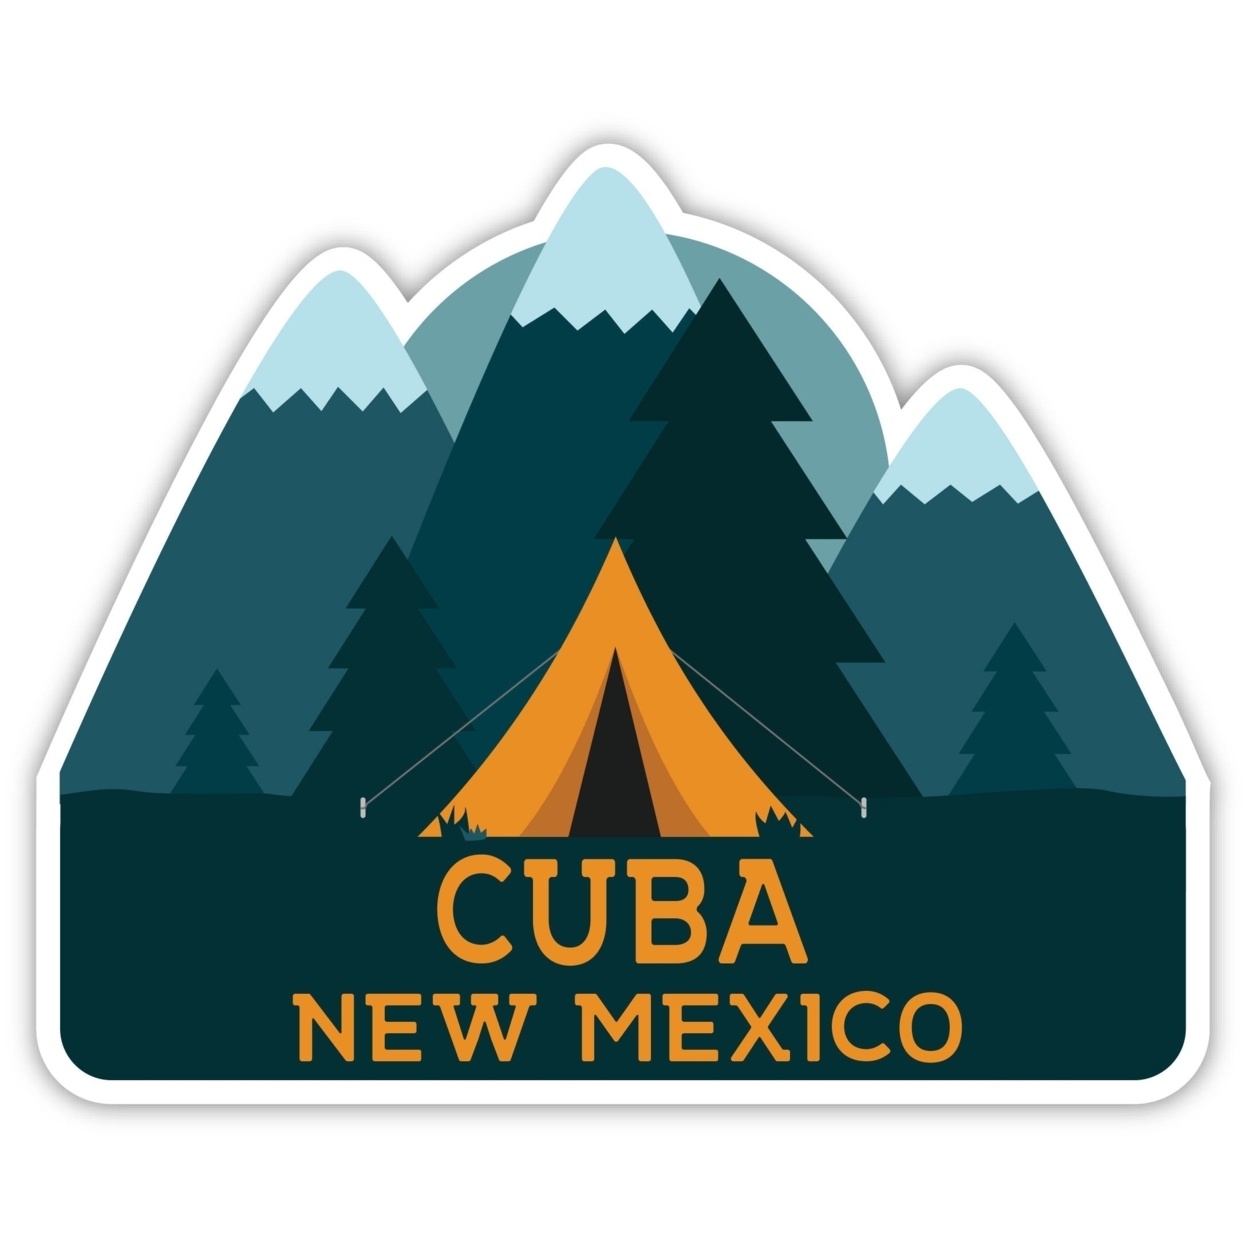 Cuba New Mexico Souvenir Decorative Stickers (Choose Theme And Size) - 4-Pack, 12-Inch, Tent